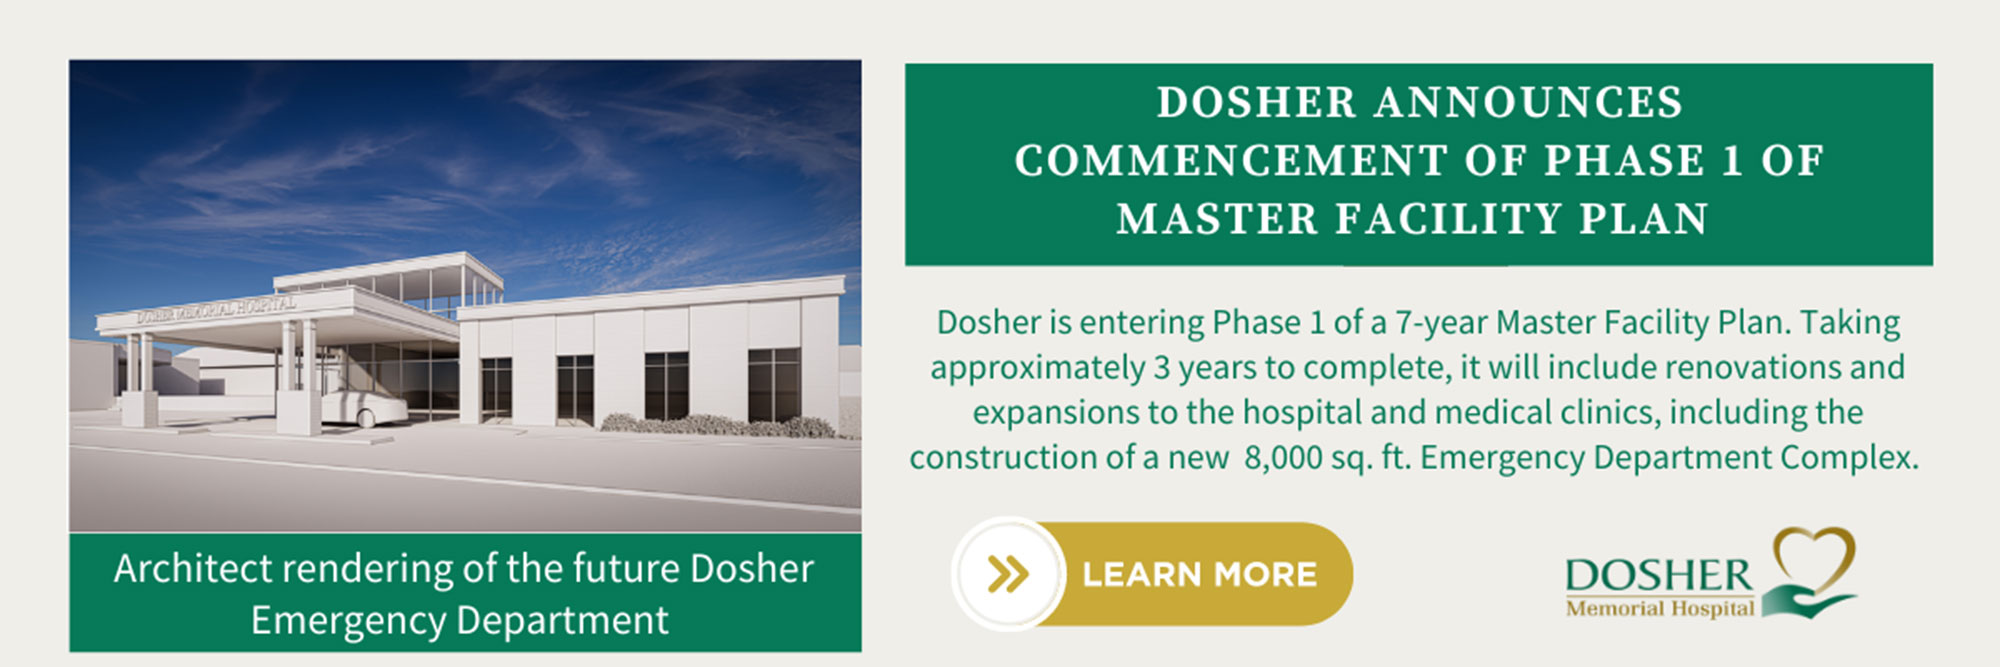 Architect rendering of the future Dosher Emergency Department


DOSHER ANNOUNCES COMMENCEMENT OF PHASE 1 OF MASTER FACILITY PLAN



Dosher is entering Phase 1 of a 7-year Master Facility Plan. Taking approximately 3 years to complete, it will include renovations and expansions to the Hospital and Medical Clinics, including the construction of a new 8,000 sq. ft. Emergency Department Complex.


LEARN MORE


DOSHER
Memorial Hospital